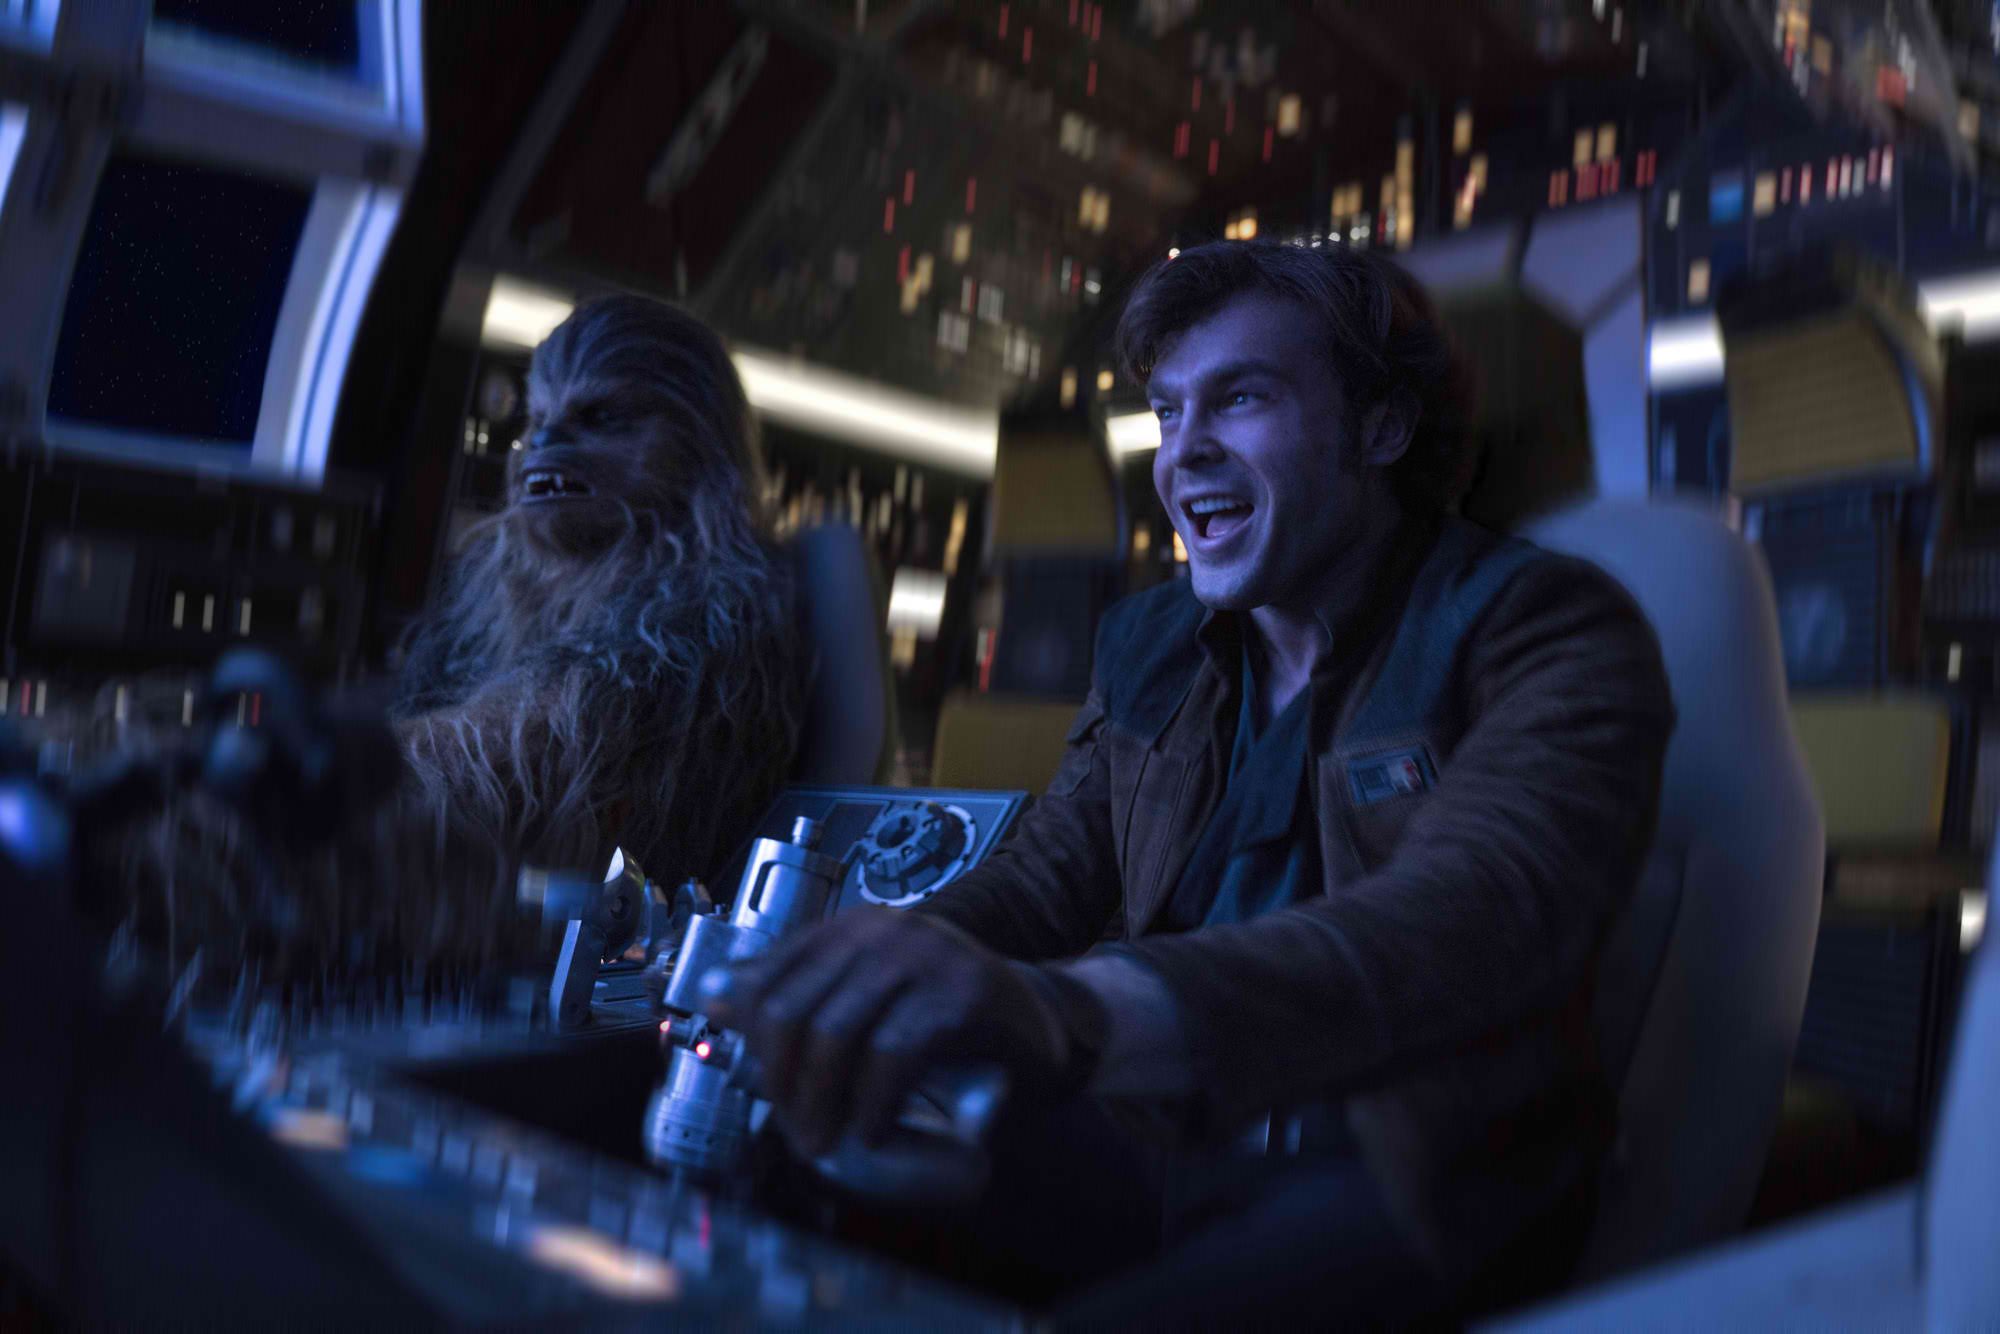 PARTNERS. Han and his partner Chewbacca take on an adventure of a lifetime. 